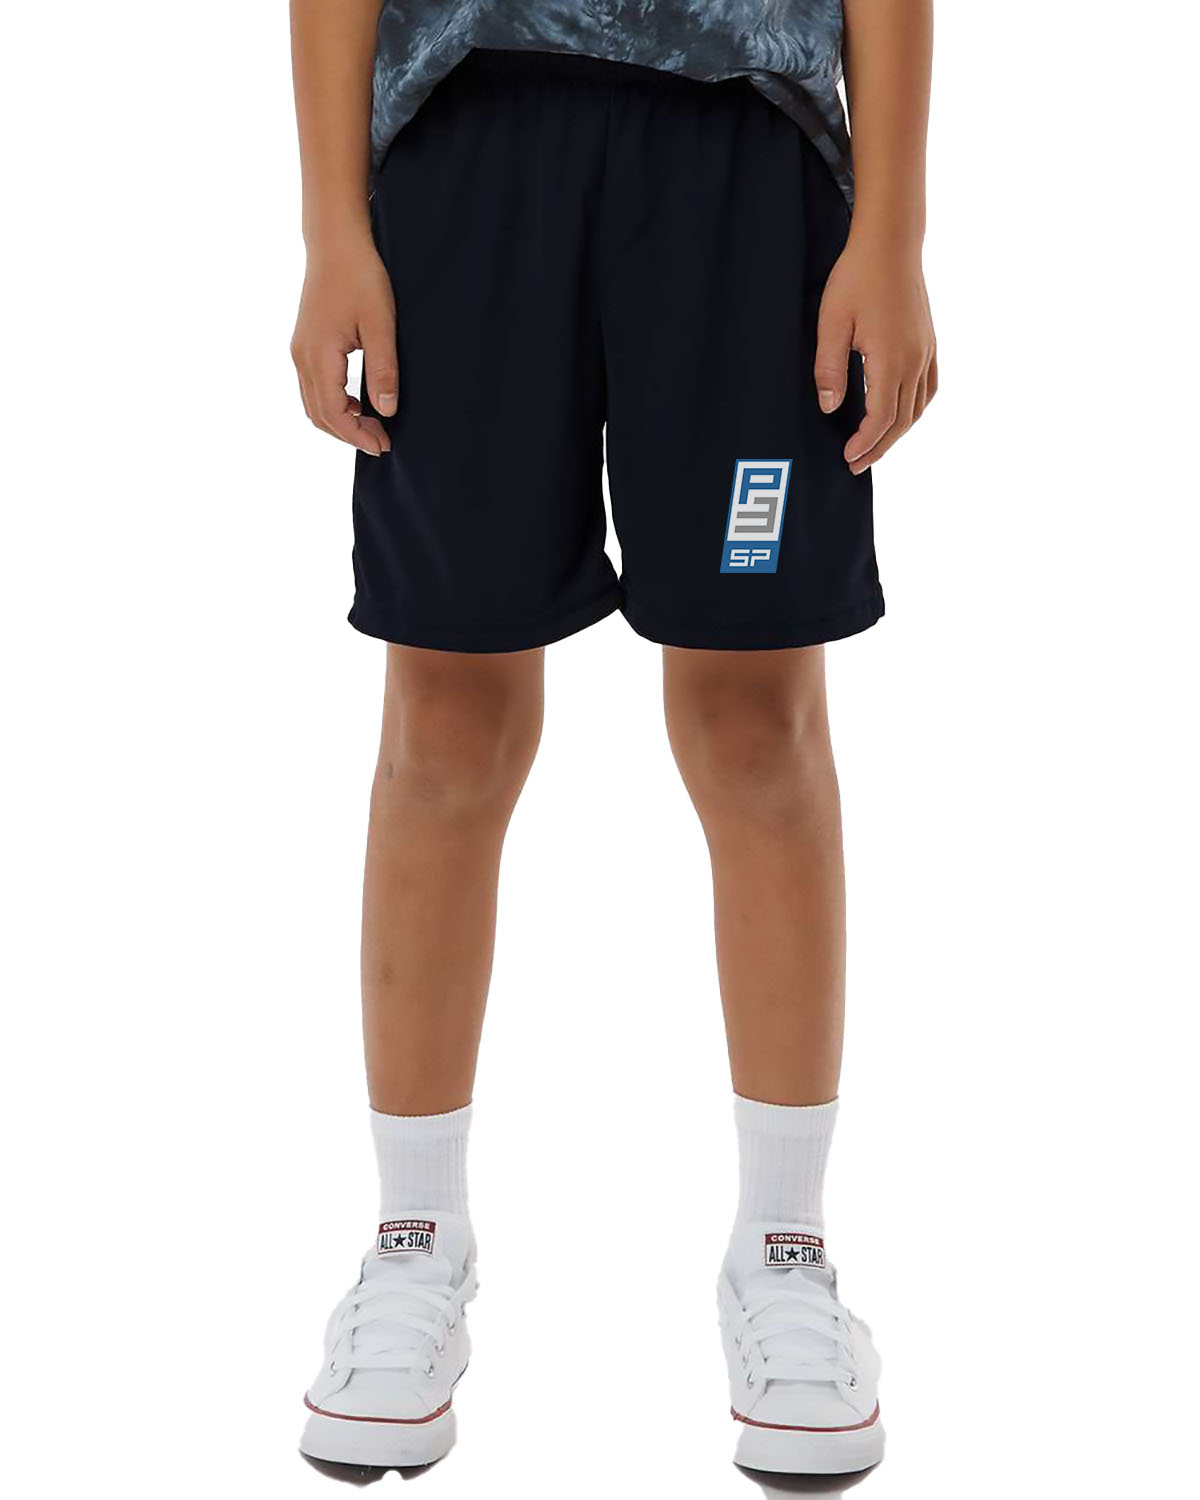 P3SP // Youth Shorts